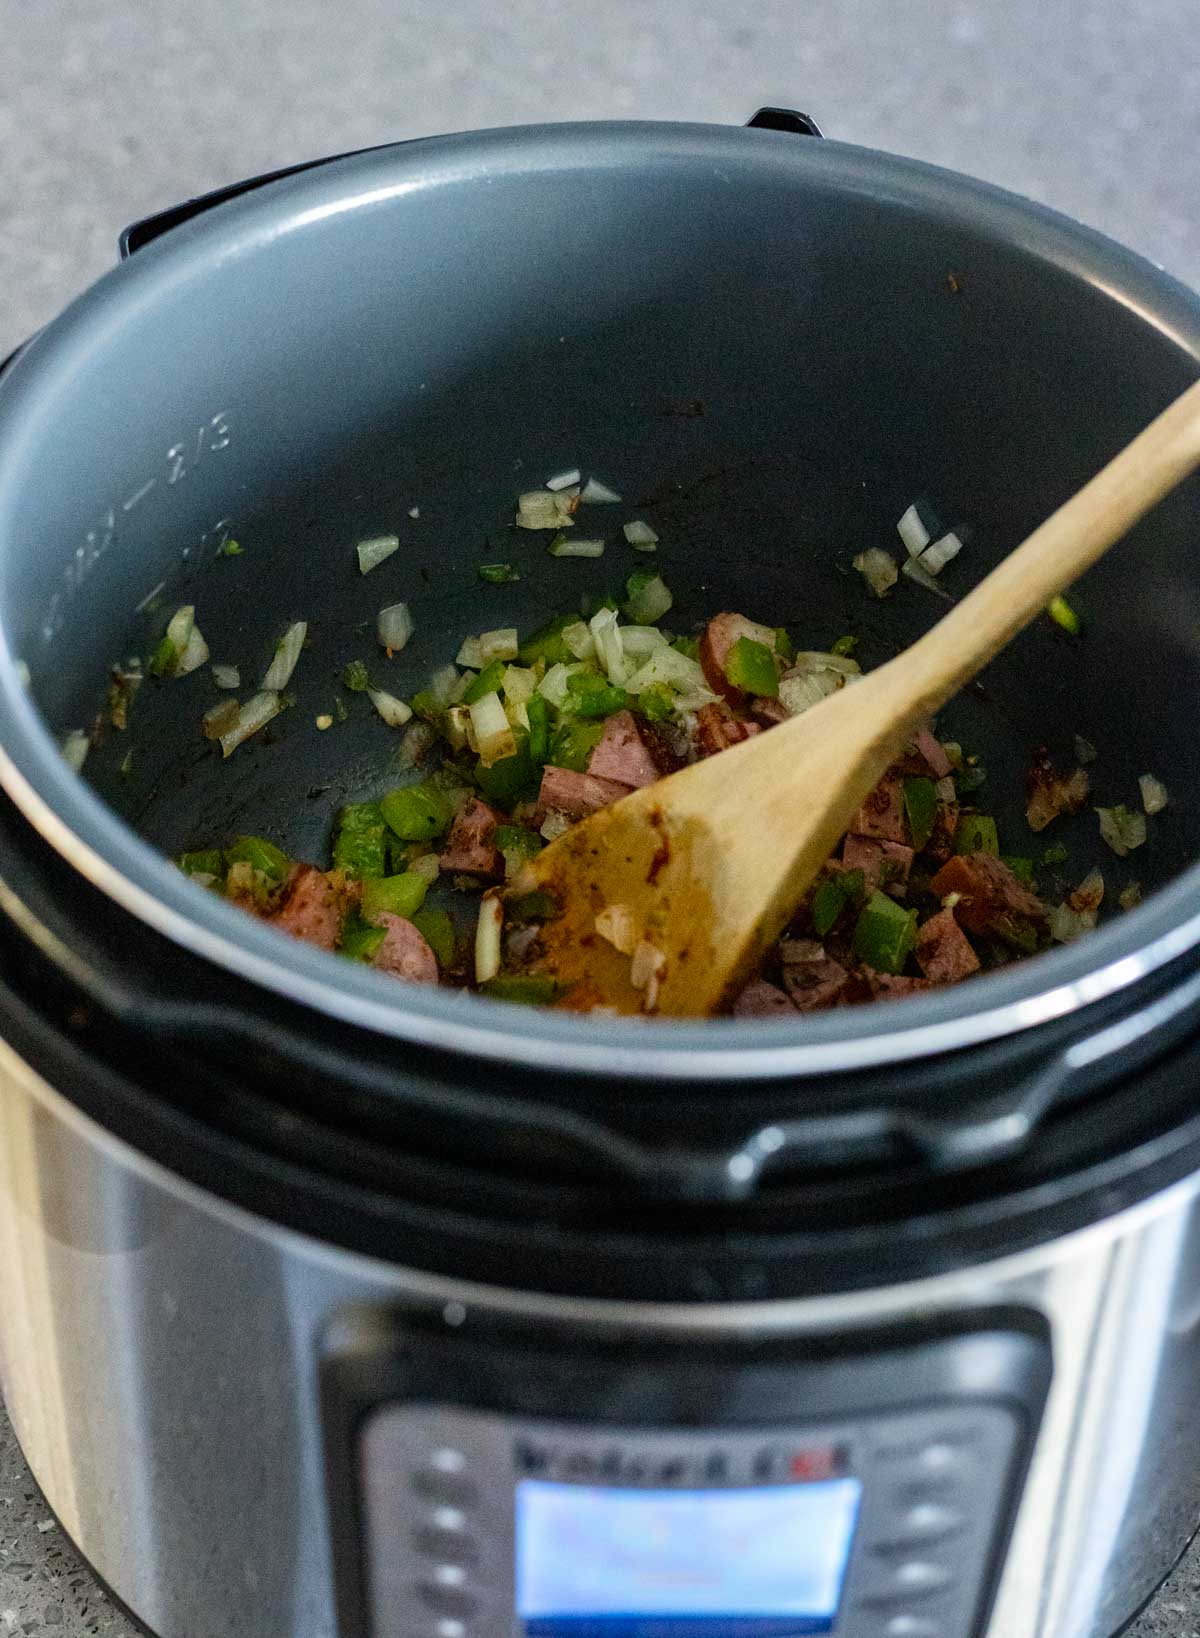 Vegetables and sausage pieces being sautéed in the Instant Pot.